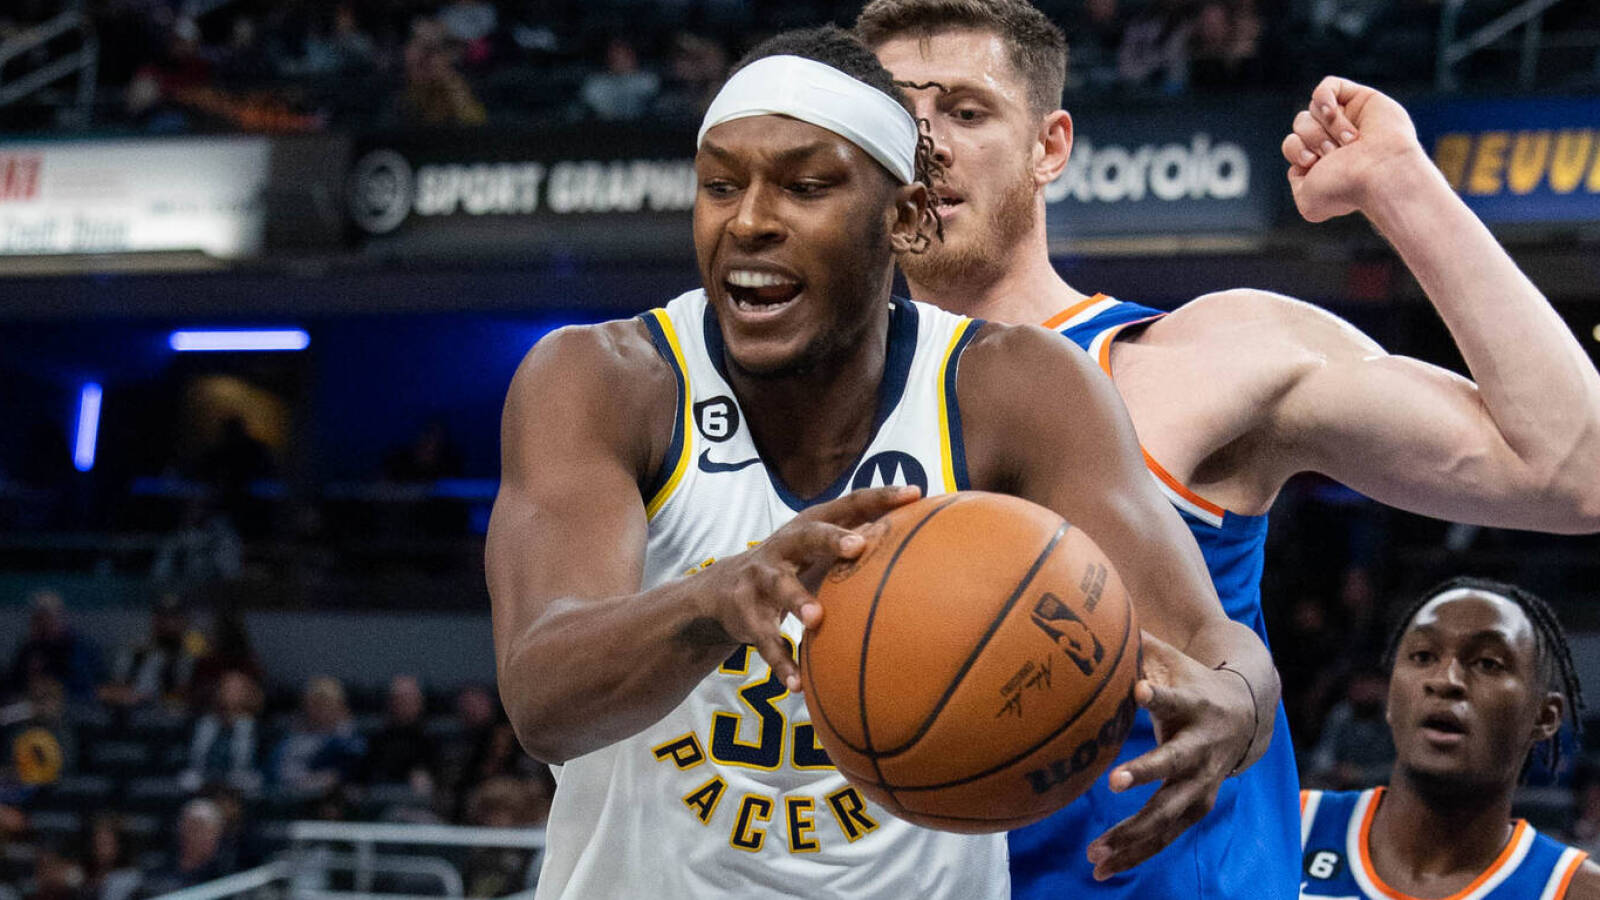 Pacers center Myles Turner sprains ankle after landing on ball boy during warmups